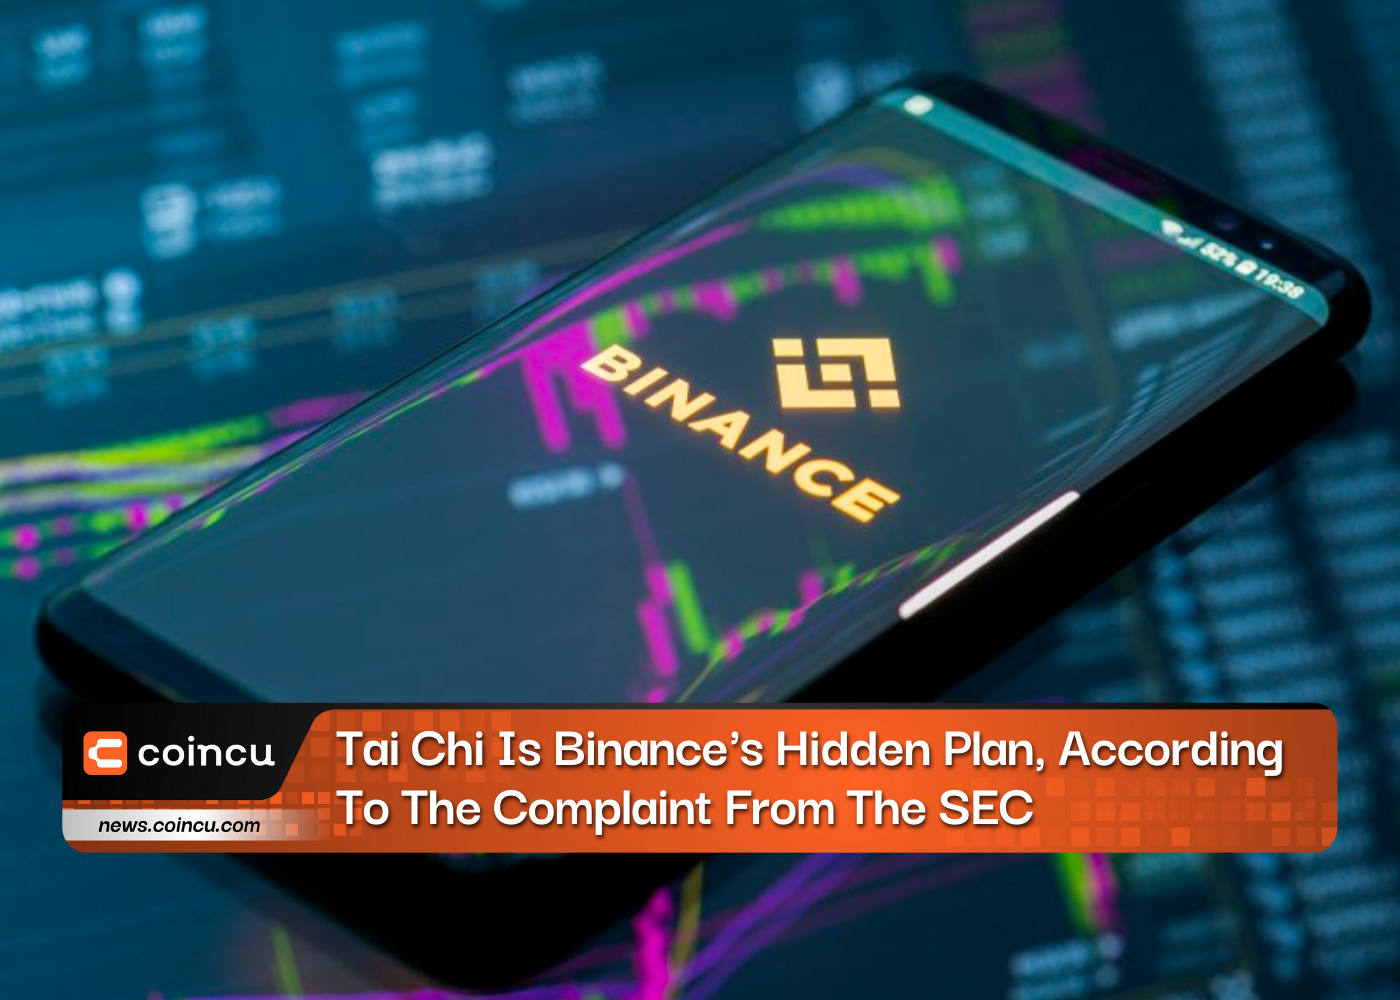 Tai Chi Is Binance's Hidden Plan, According To The Complaint From The SEC